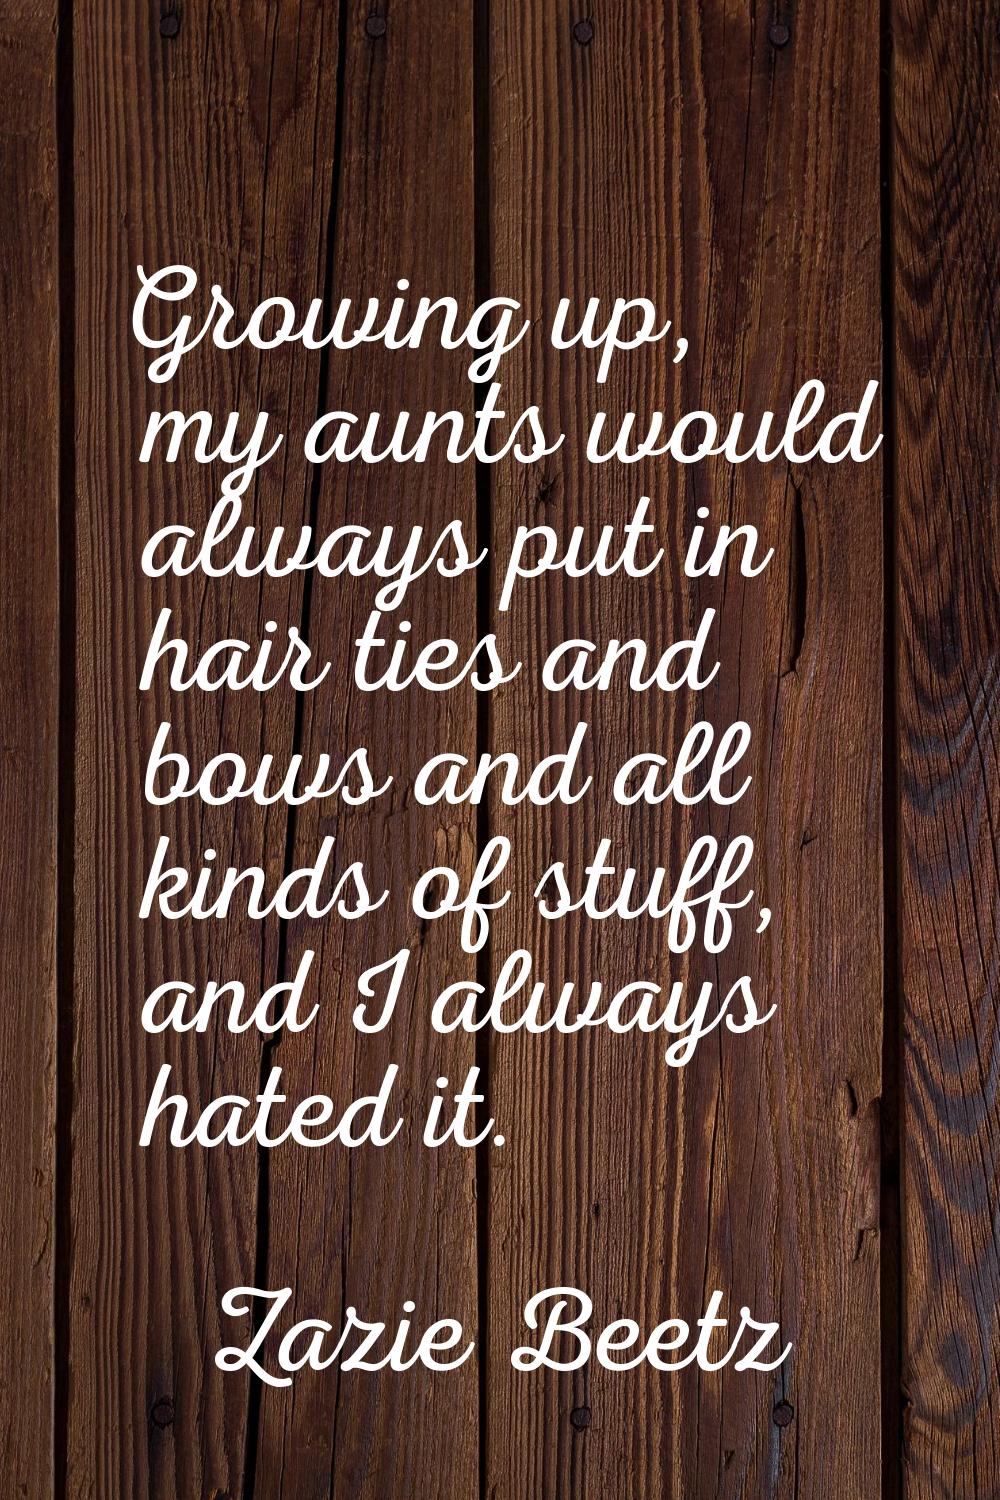 Growing up, my aunts would always put in hair ties and bows and all kinds of stuff, and I always ha